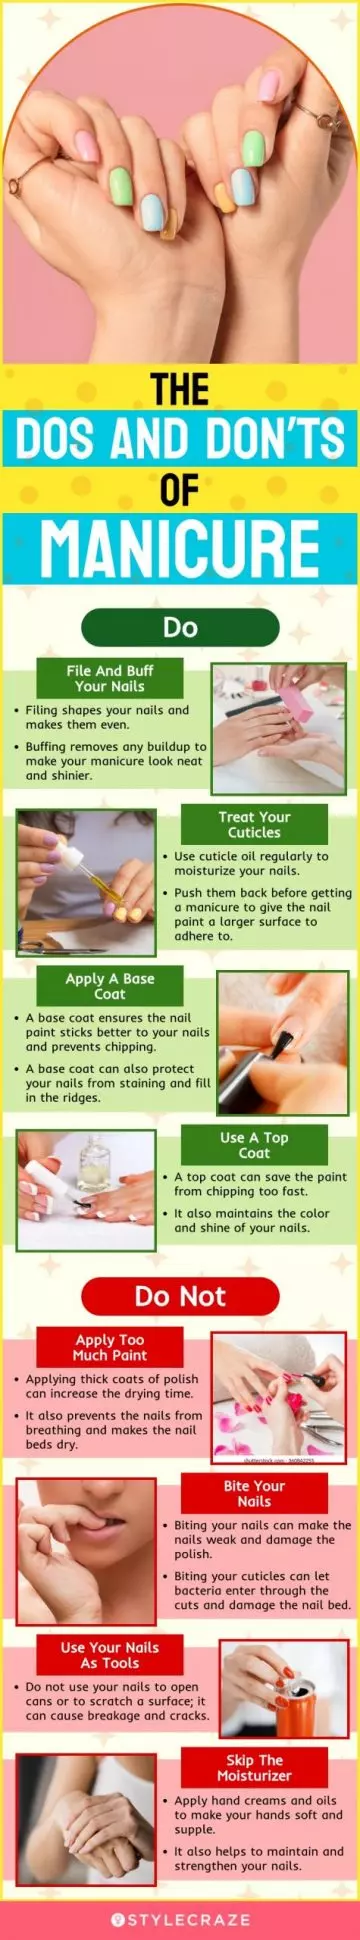 The DOs and DON’Ts Of Manicure (infographic)